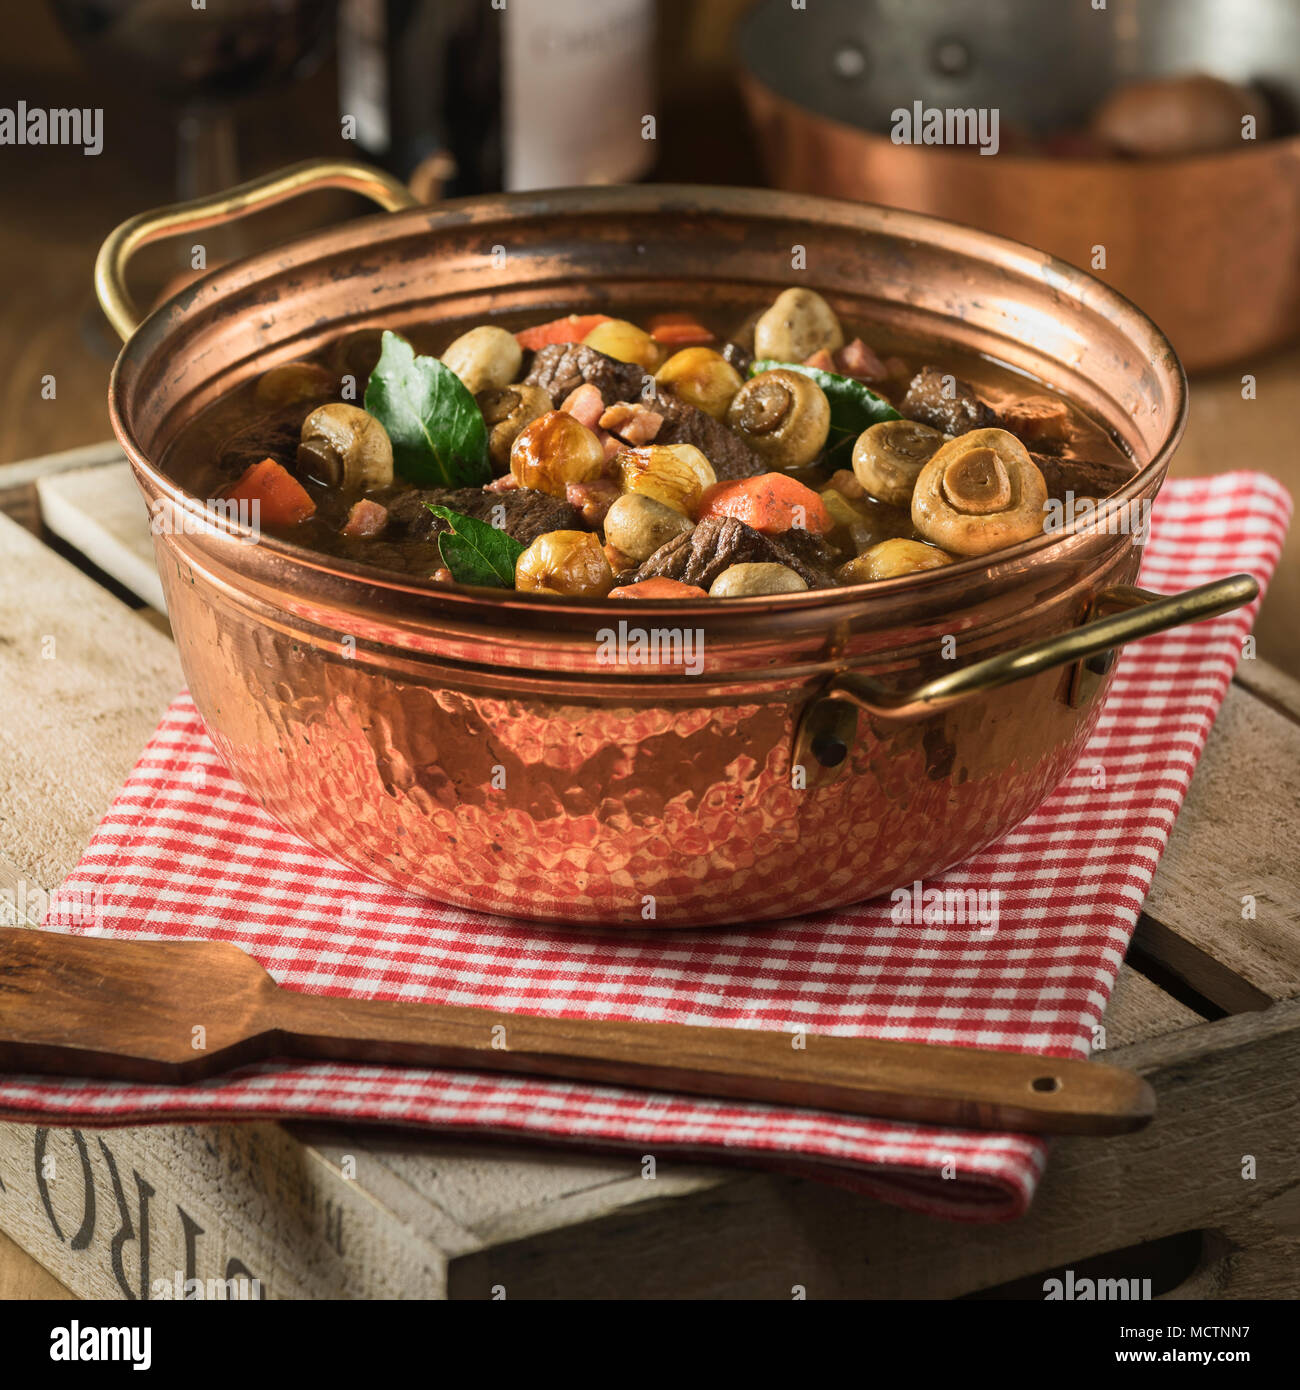 Beef bourguignon. Beef and red wine stew. Food France Stock Photo